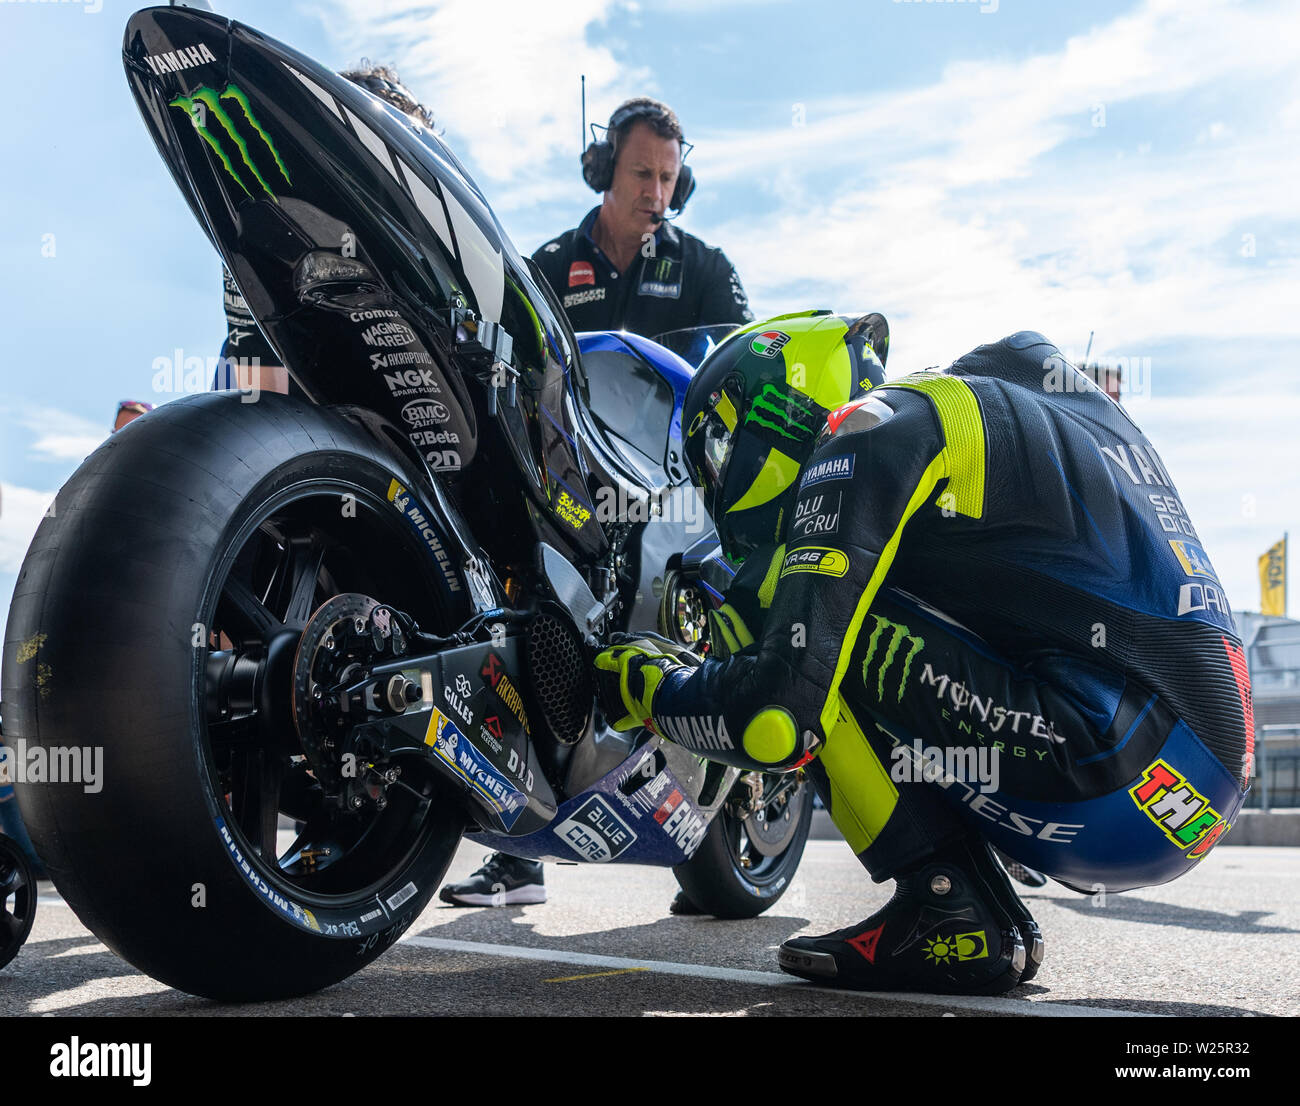 Hohenstein Ernstthal, Germany. . 06th July, 2019. Motorcycle, Grand Prix of  Germany, 3rd free practice MotoGP at the Sachsenring: Rider Valentino Rossi  (Italy, Monster Energy Yamaha MotoGP Team) squats in front of